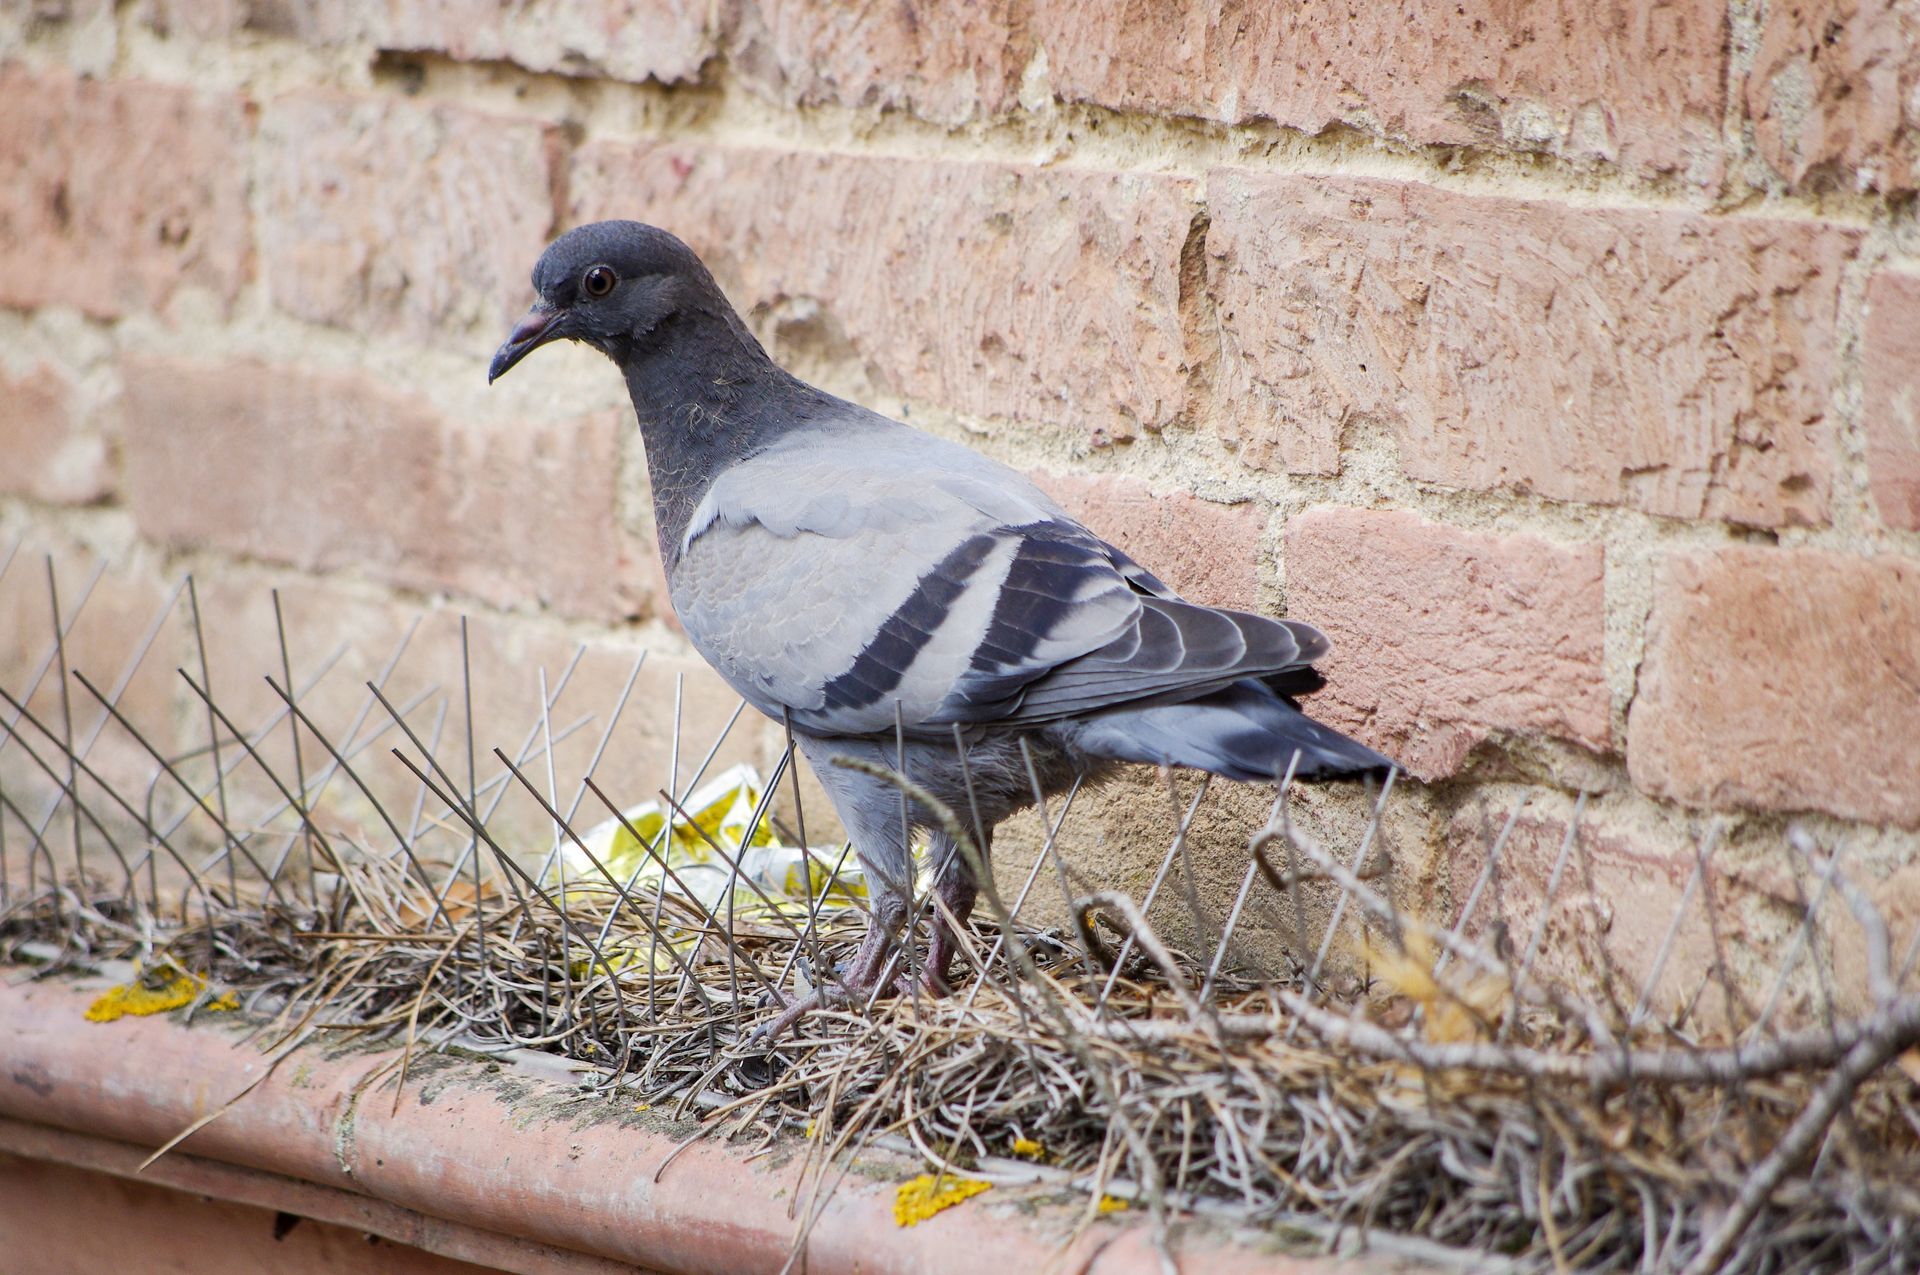 Trapping Pigeons